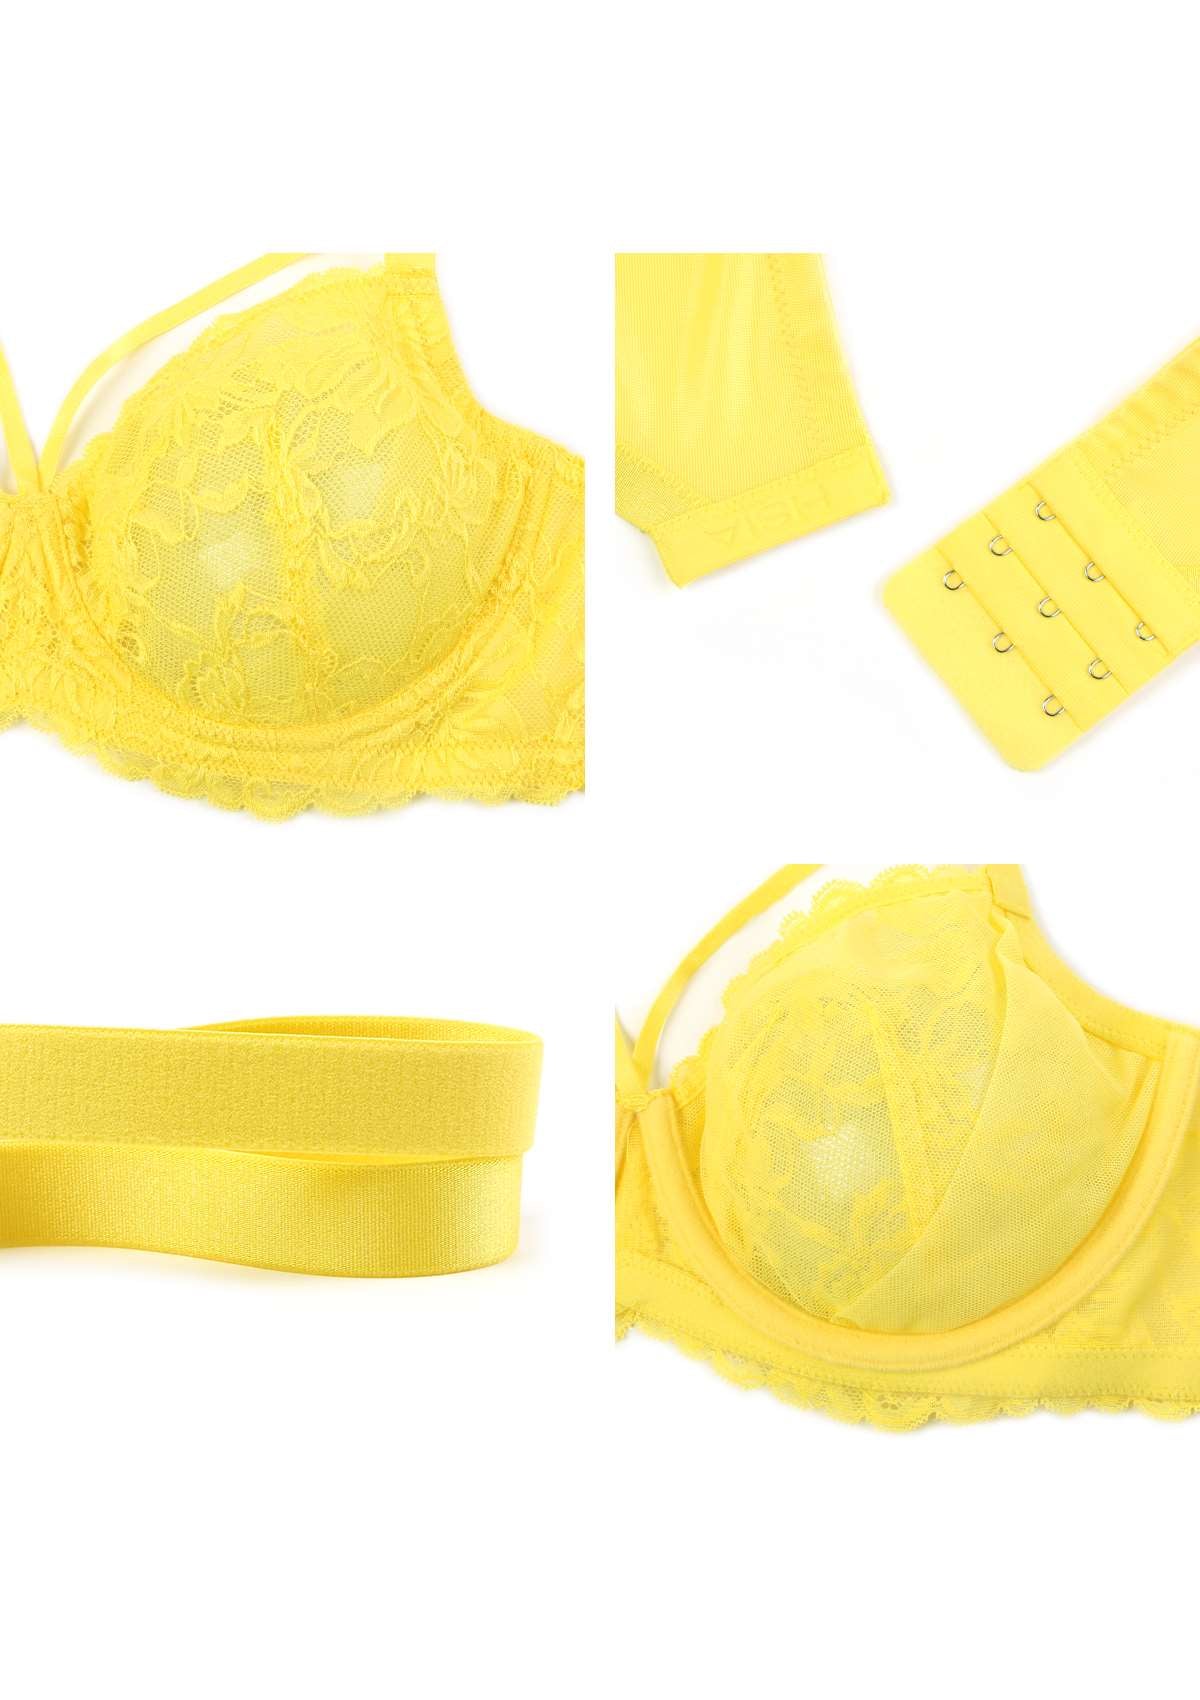 HSIA Unlined Lace Mesh Minimizer Bra For Large Breasts, Full Coverage - Bright Yellow / 42 / DDD/F